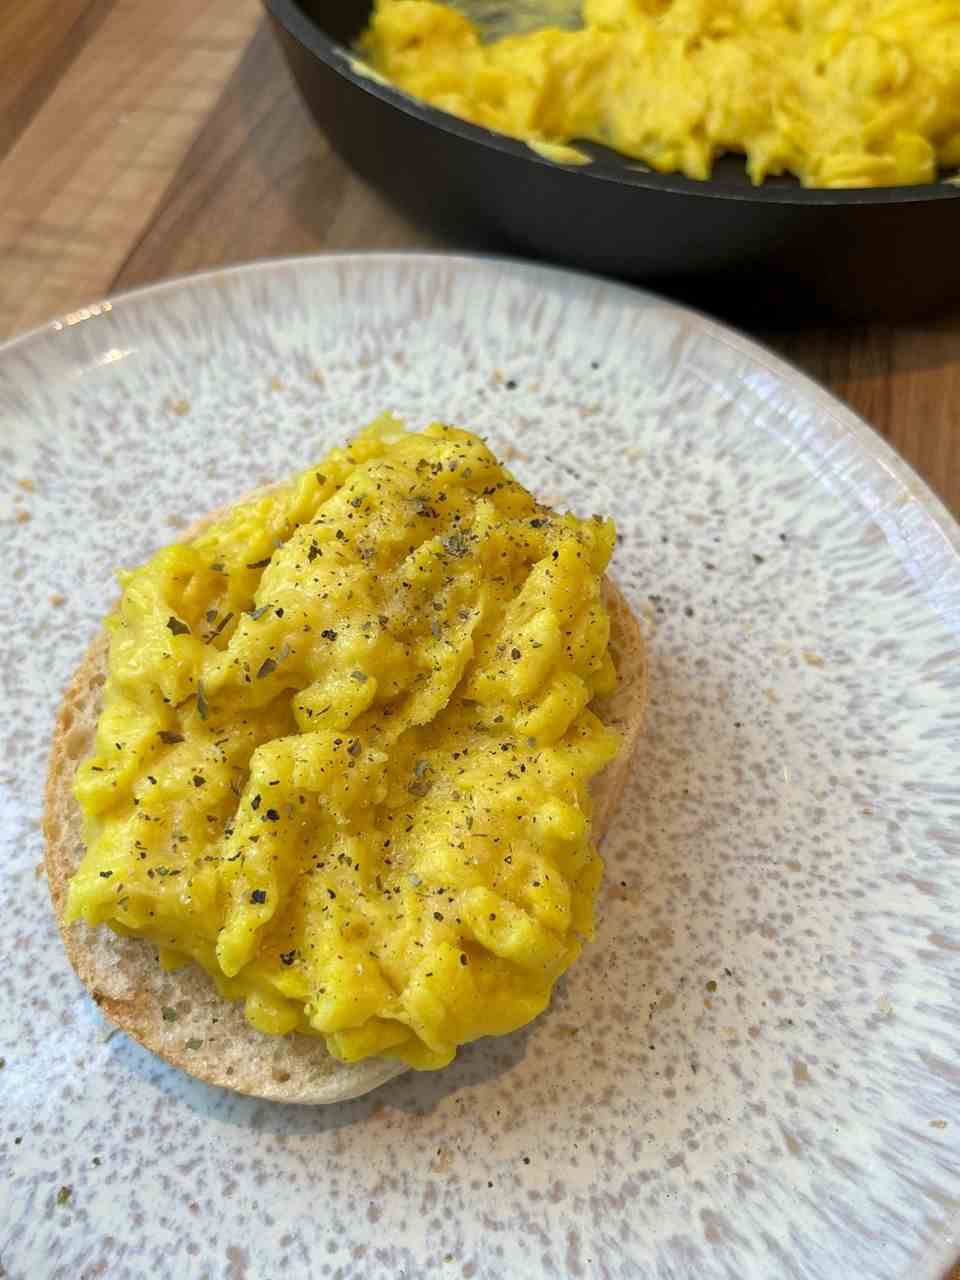 That's what it looks like "vegan scrambled eggs" from the Munich start-up Greenforce